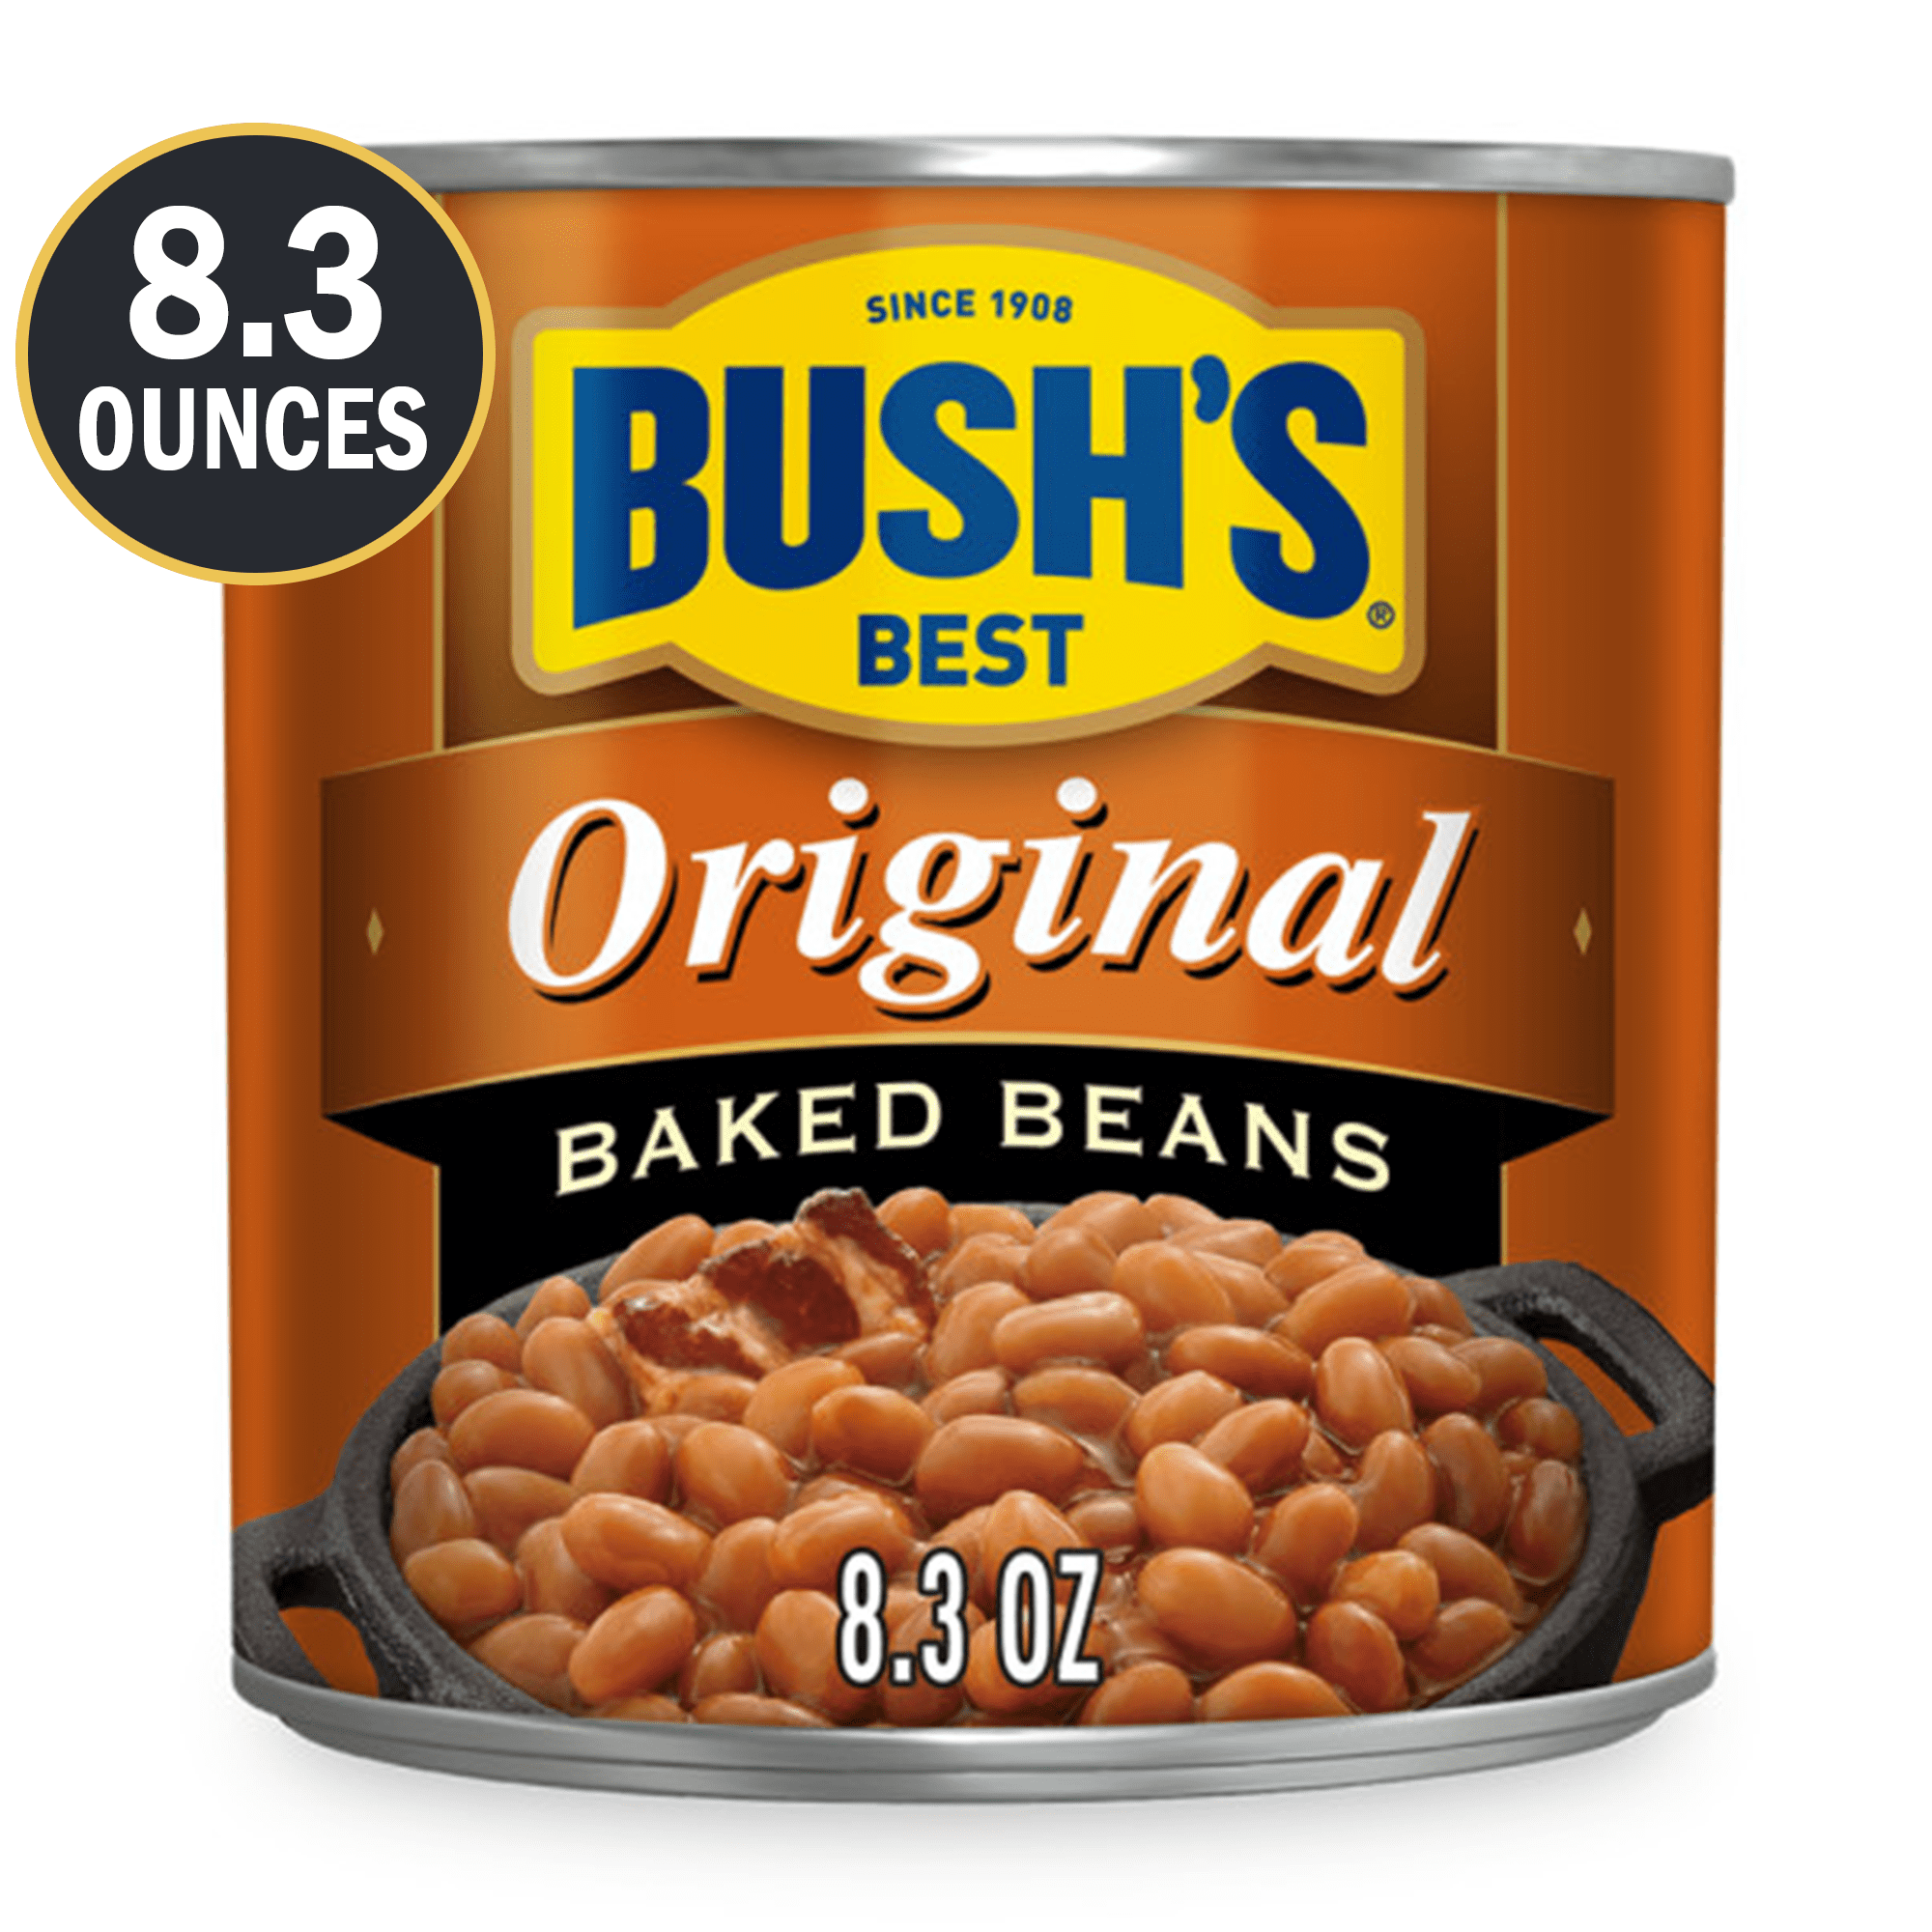 Bush's Original Baked Beans with Bacon and Brown Sugar, 8.3 oz